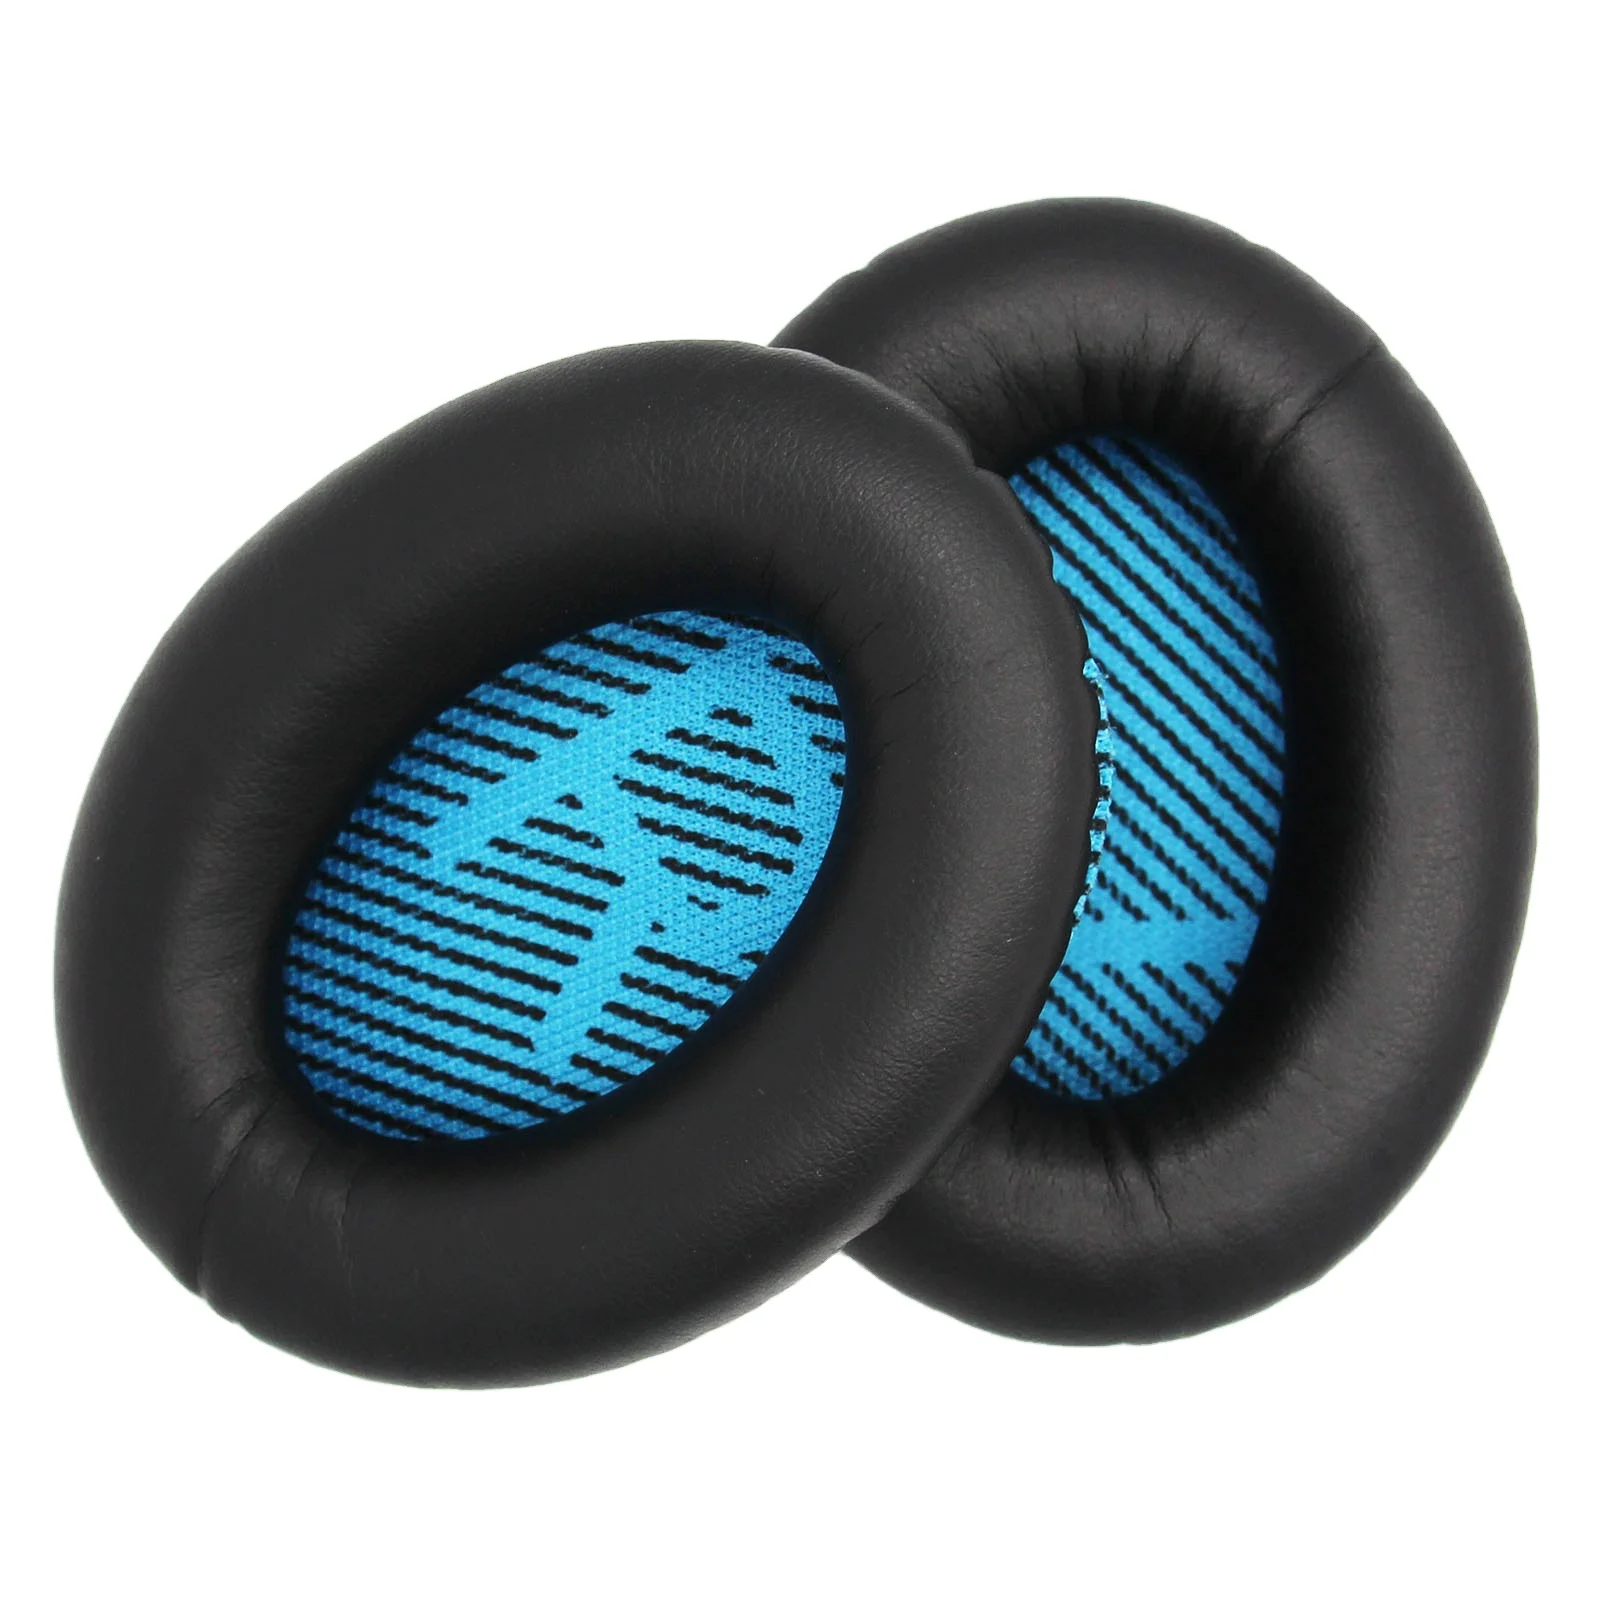 Bose Replacement Ear Pads Cushion Earphone Earpad Covers For BOSE QC35 QC25 QC15 AE2 